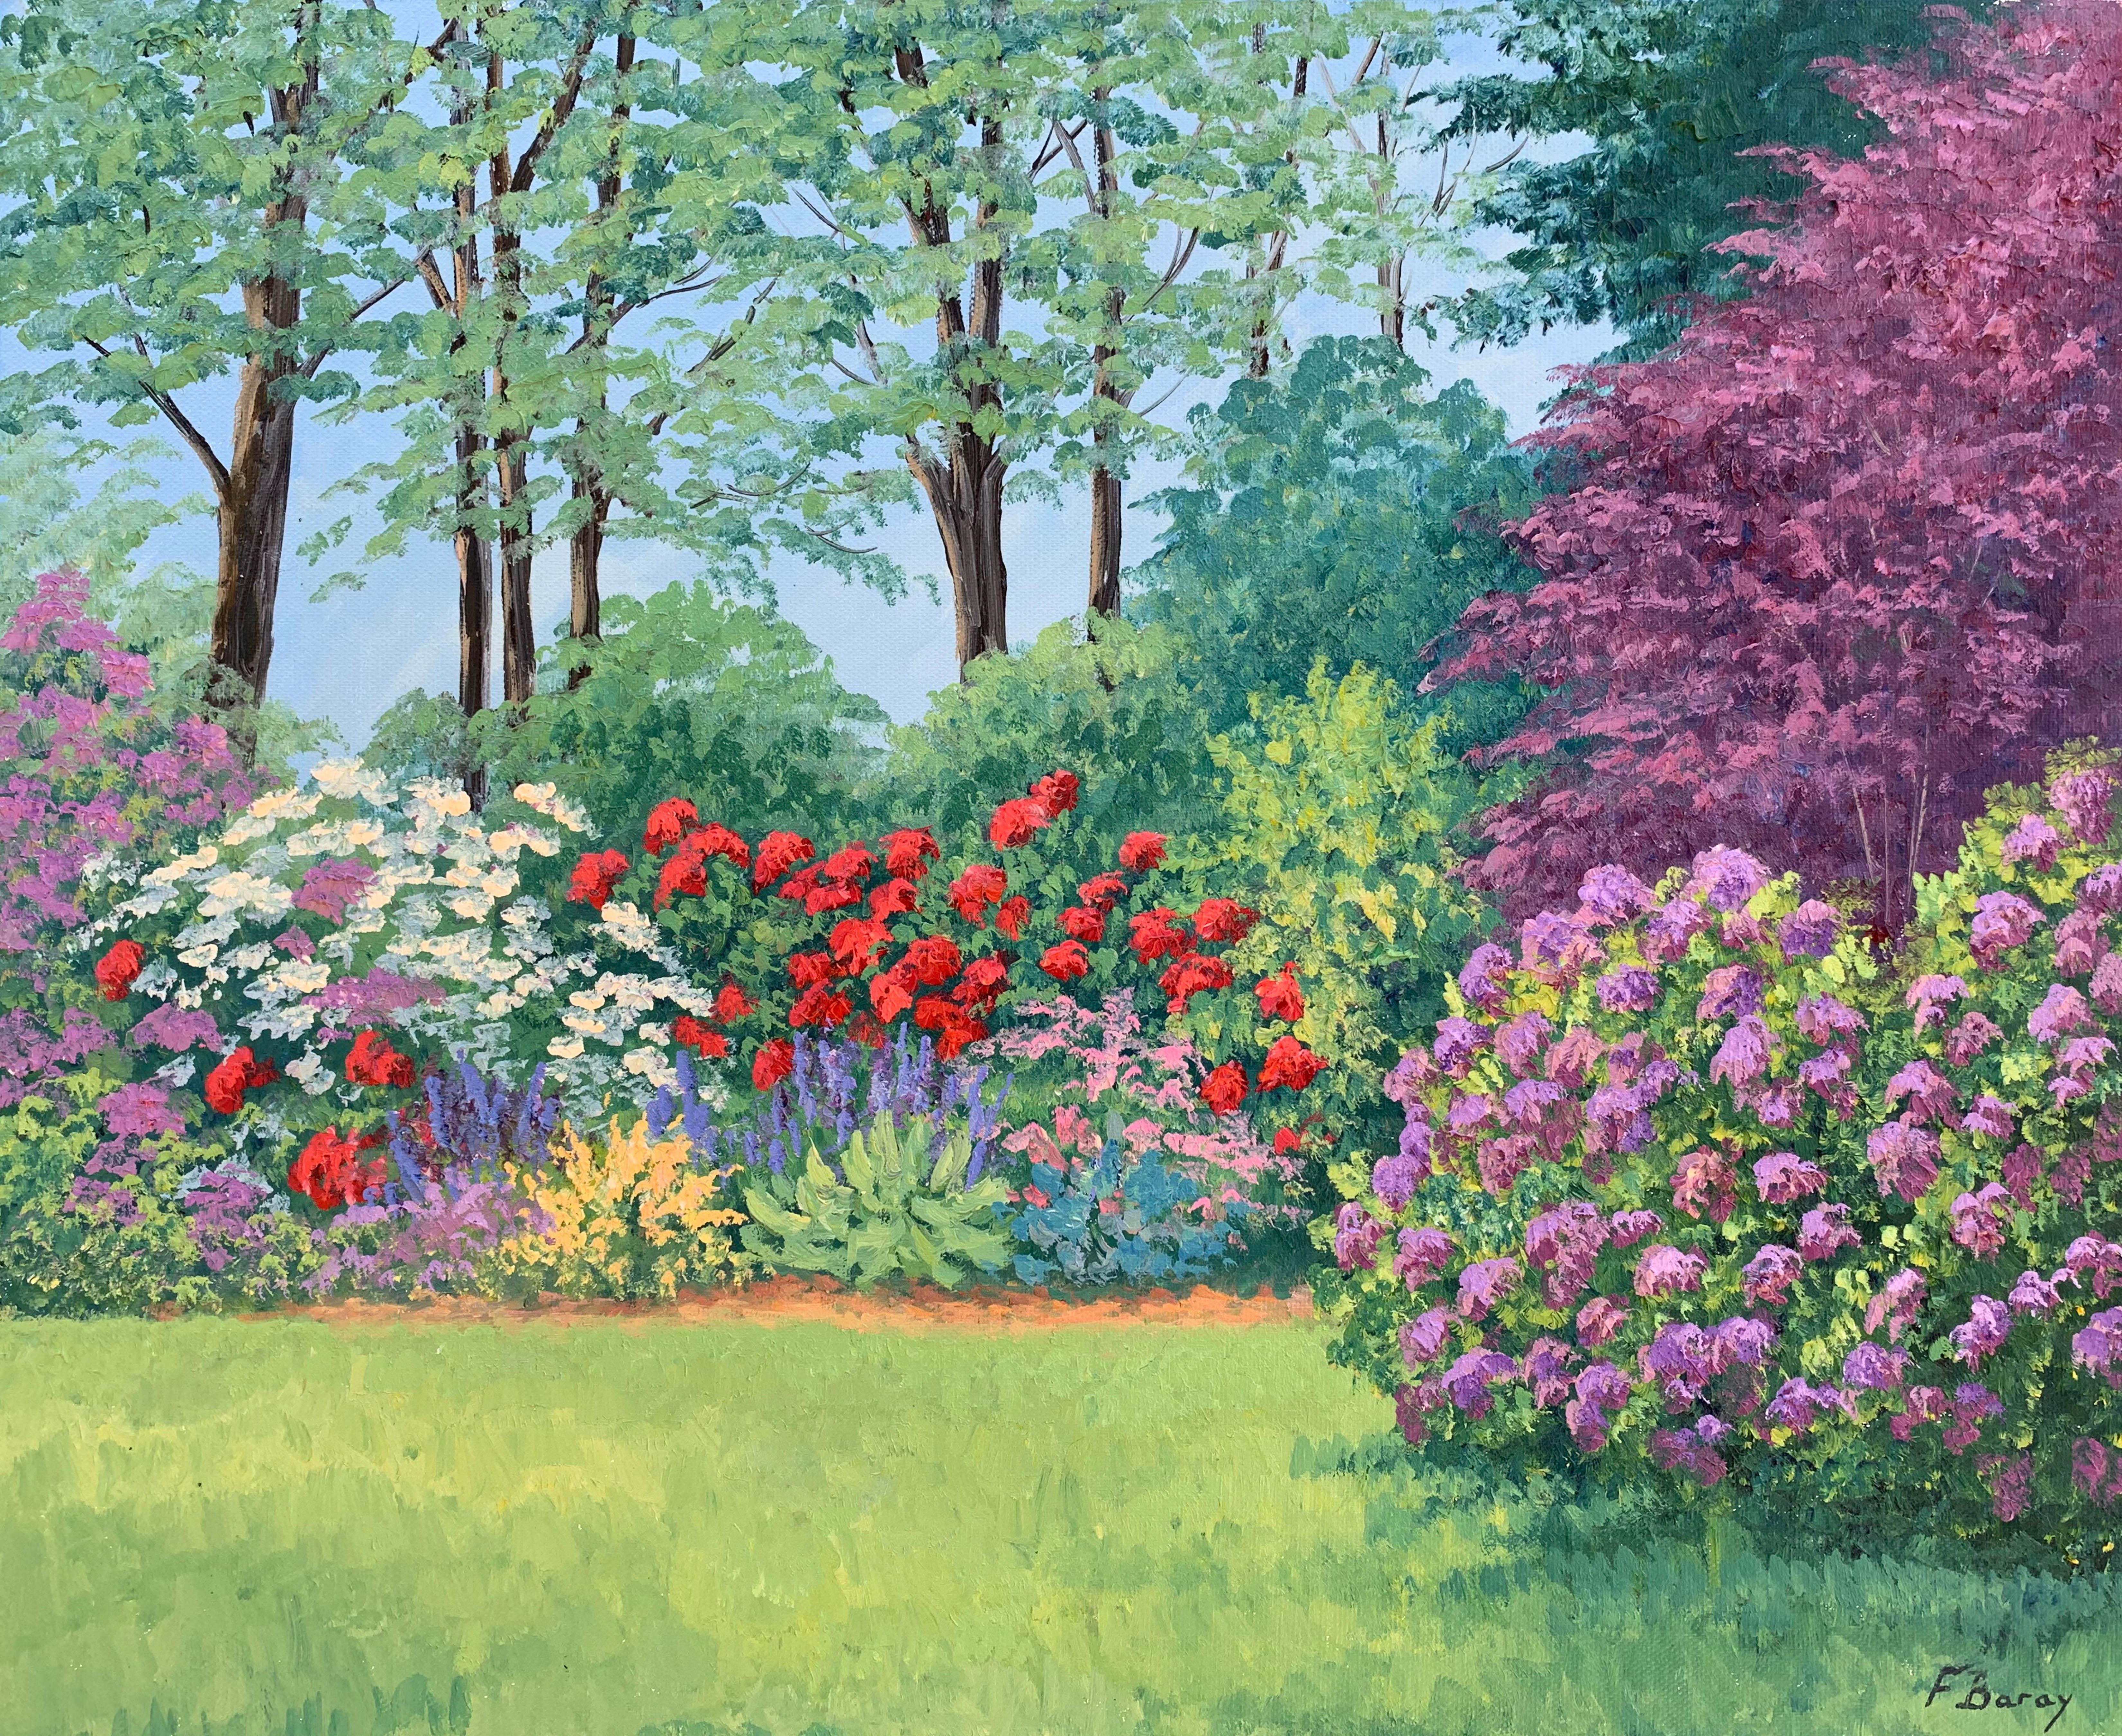 Frederique Baray Landscape Painting - Les Rhododendrons